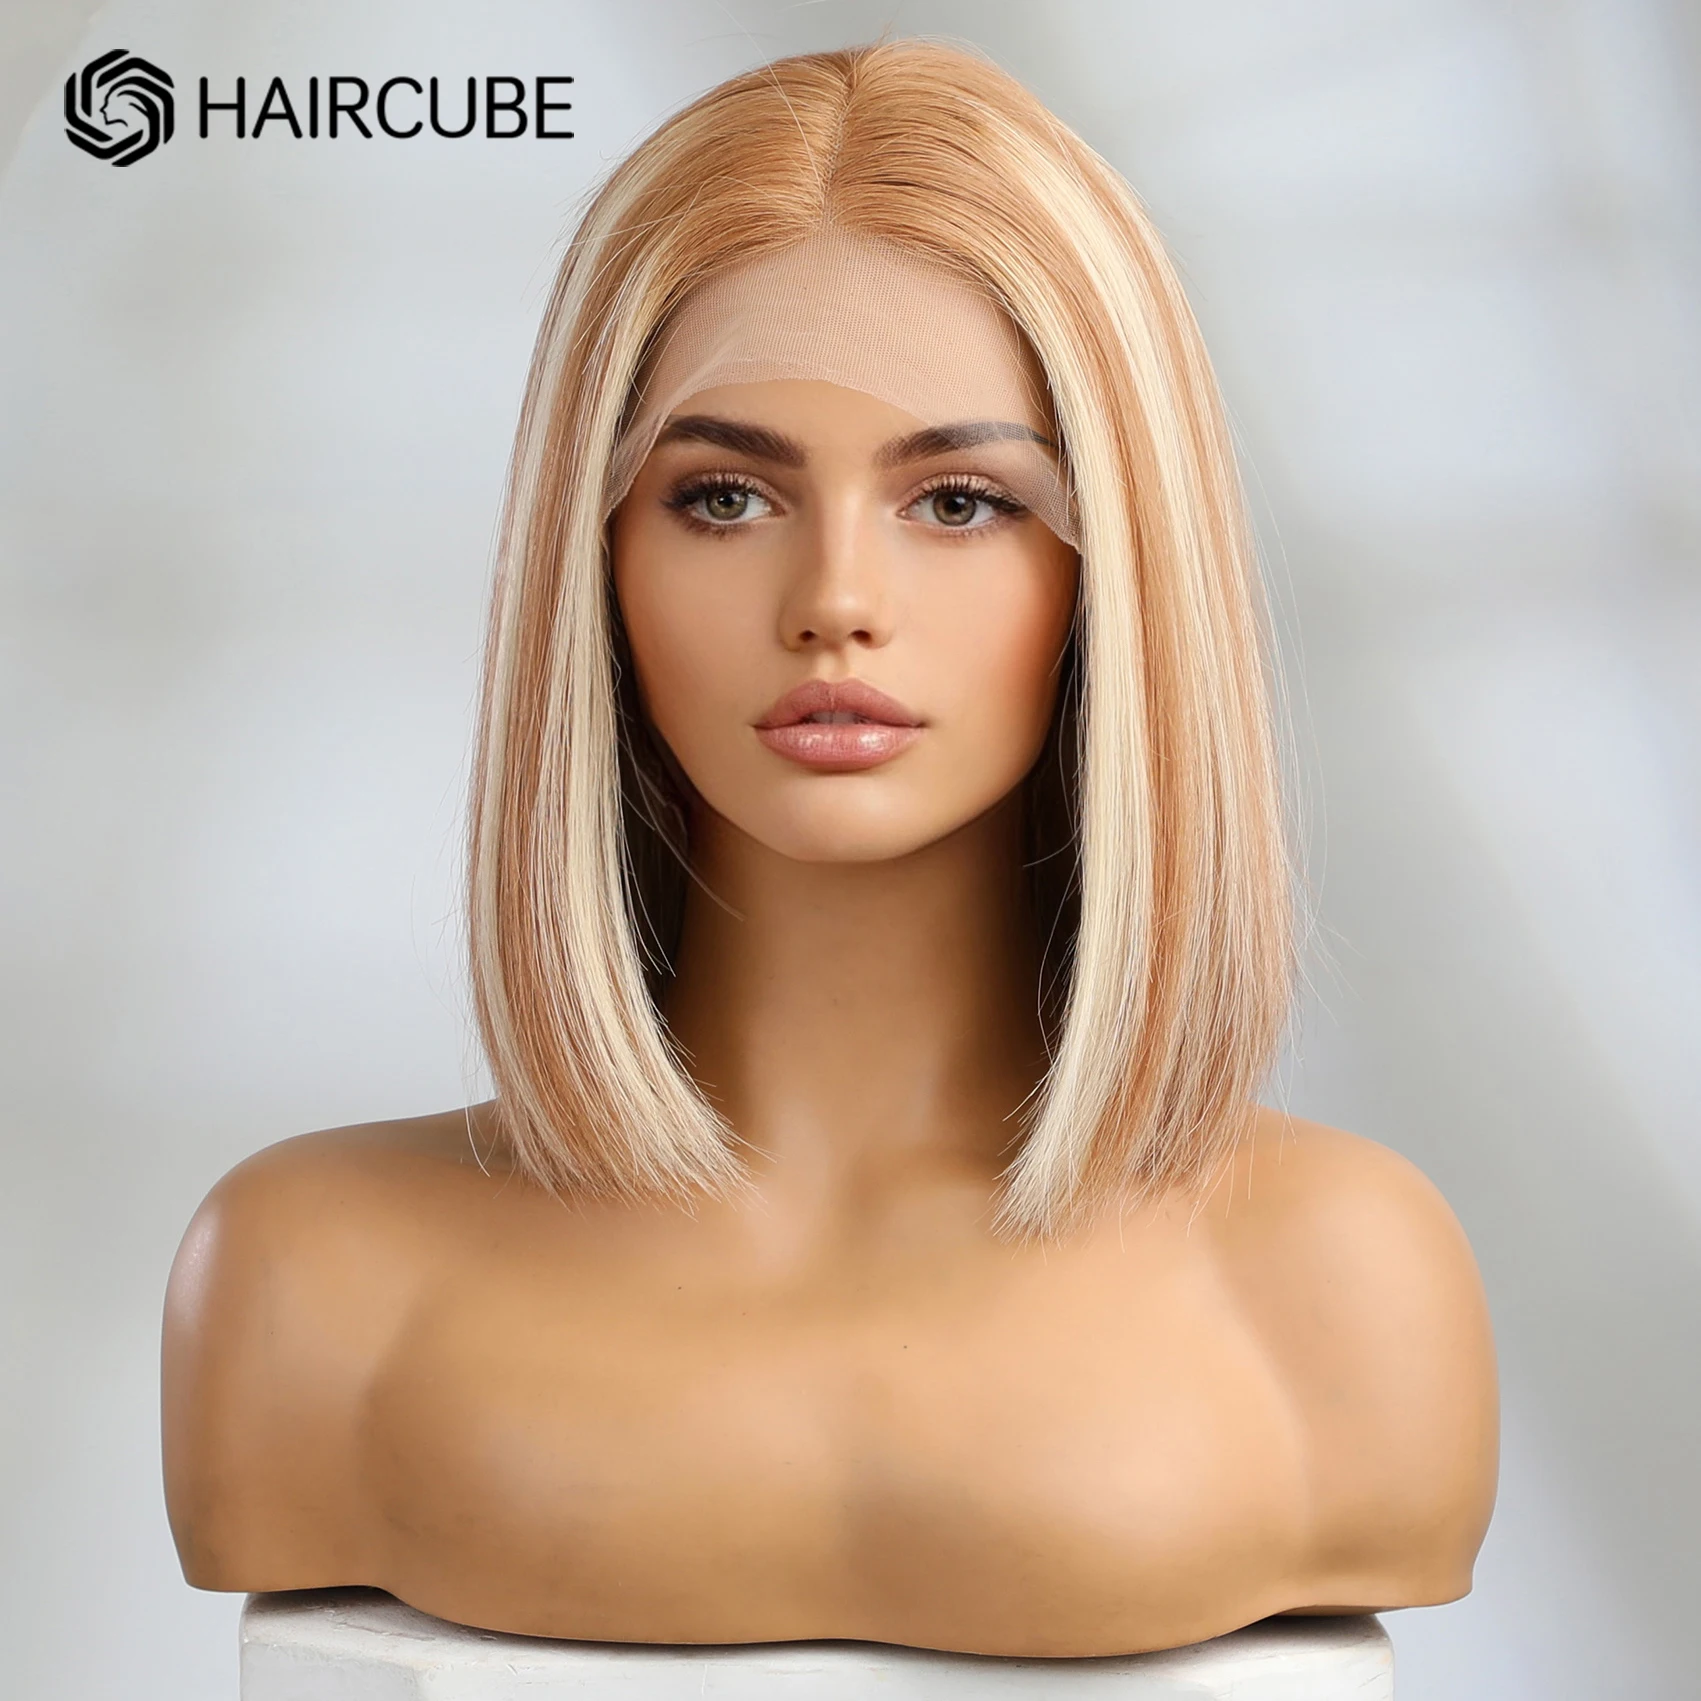 HAIRCUBE Long Straight Bob Human Hair Wig Blonde Lace Frontal Wigs 13*1DH Transparent Lace Wig Natural Human Hair Wigs for Women